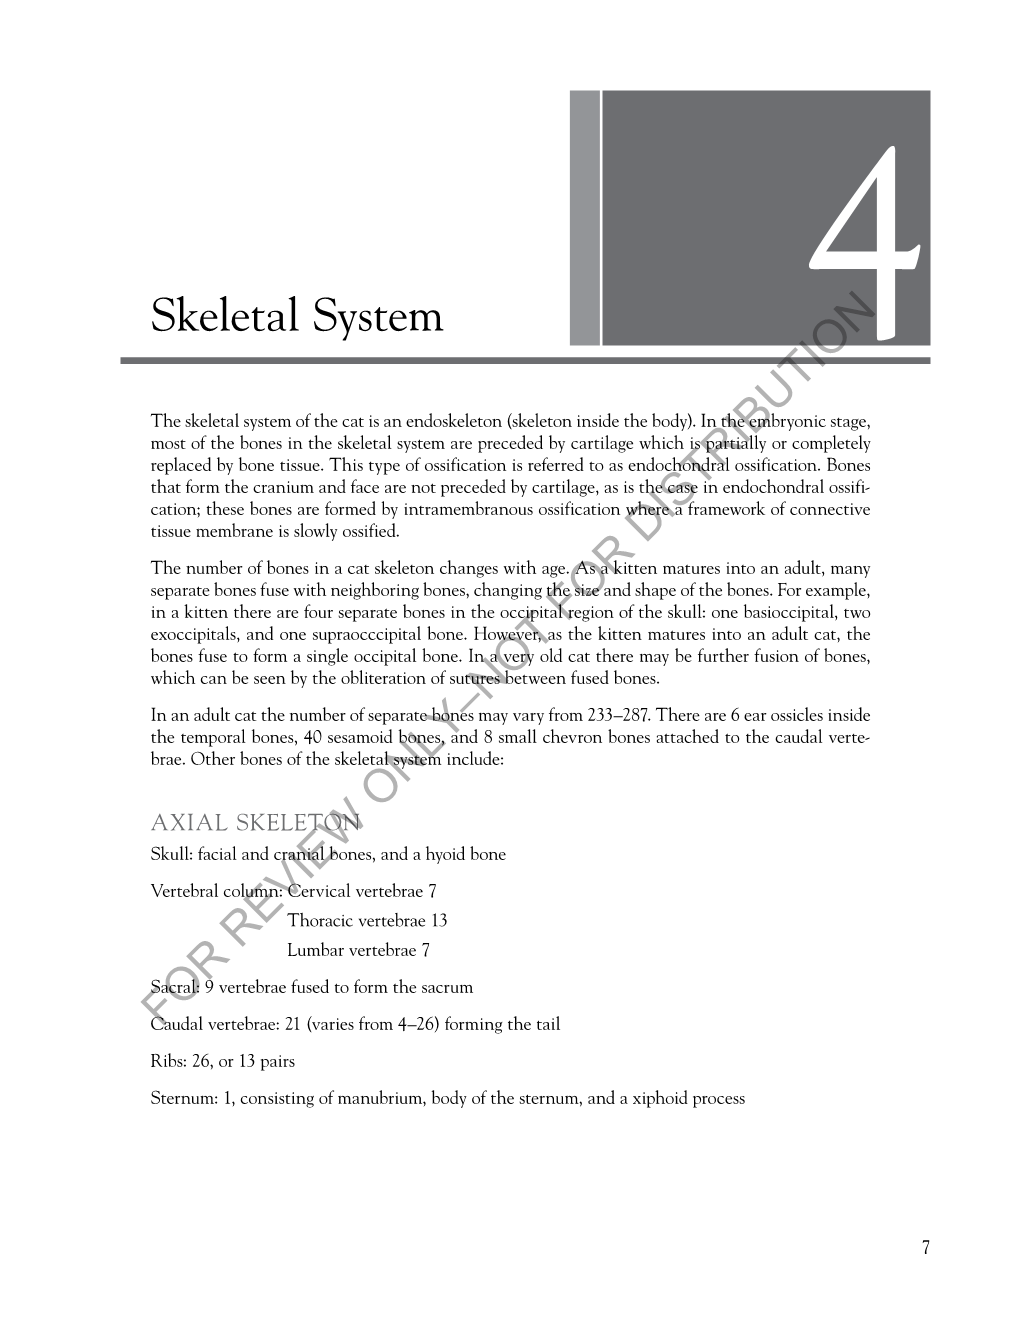 Skeletal System for REVIEW ONLY–NOT for DISTRIBUTION